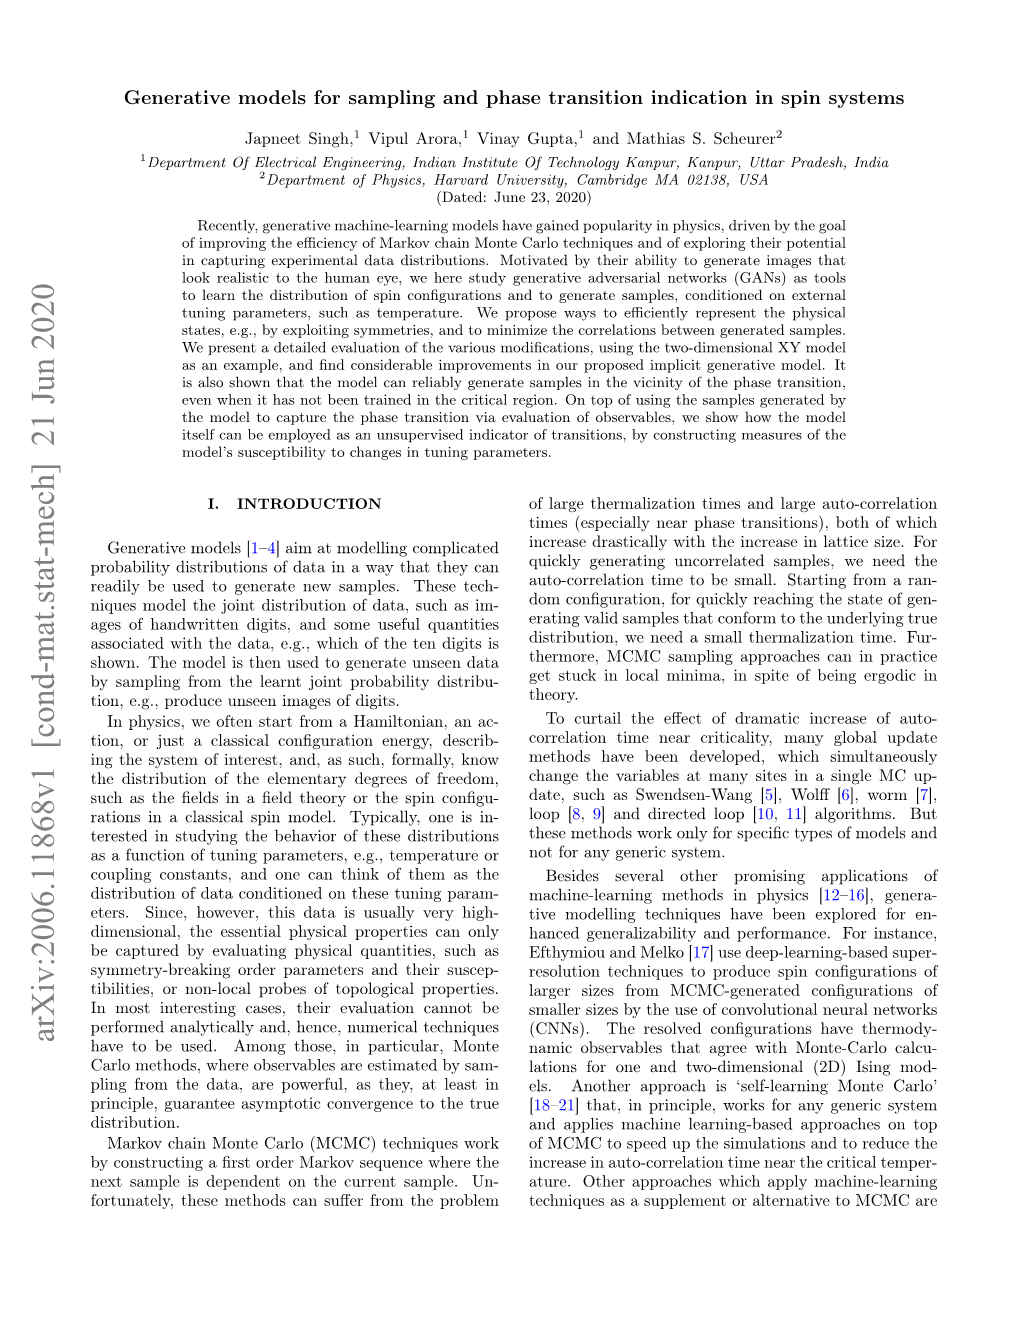 Generative Models for Sampling and Phase Transition Indication in Spin Systems